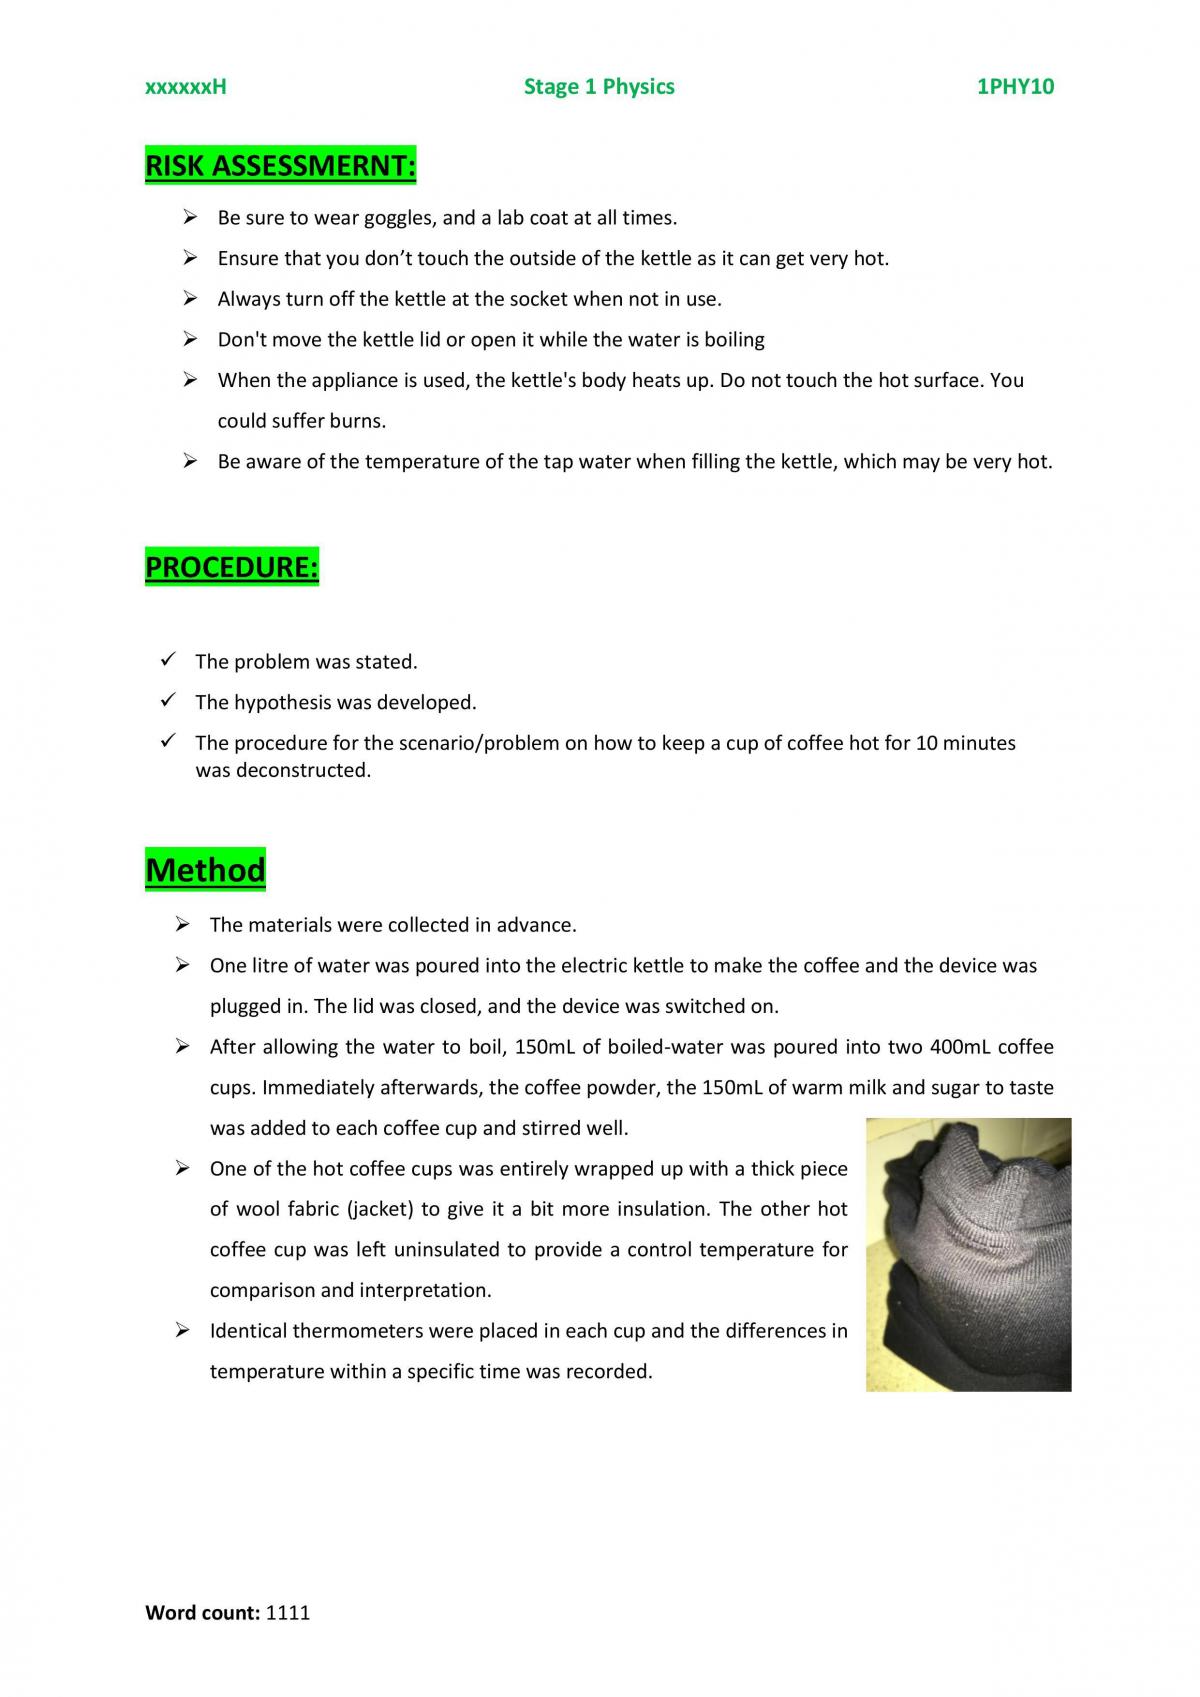 Stage 1 Physics Thermodynamics Hot Coffee- How Should I Keep it Hot? - Page 5